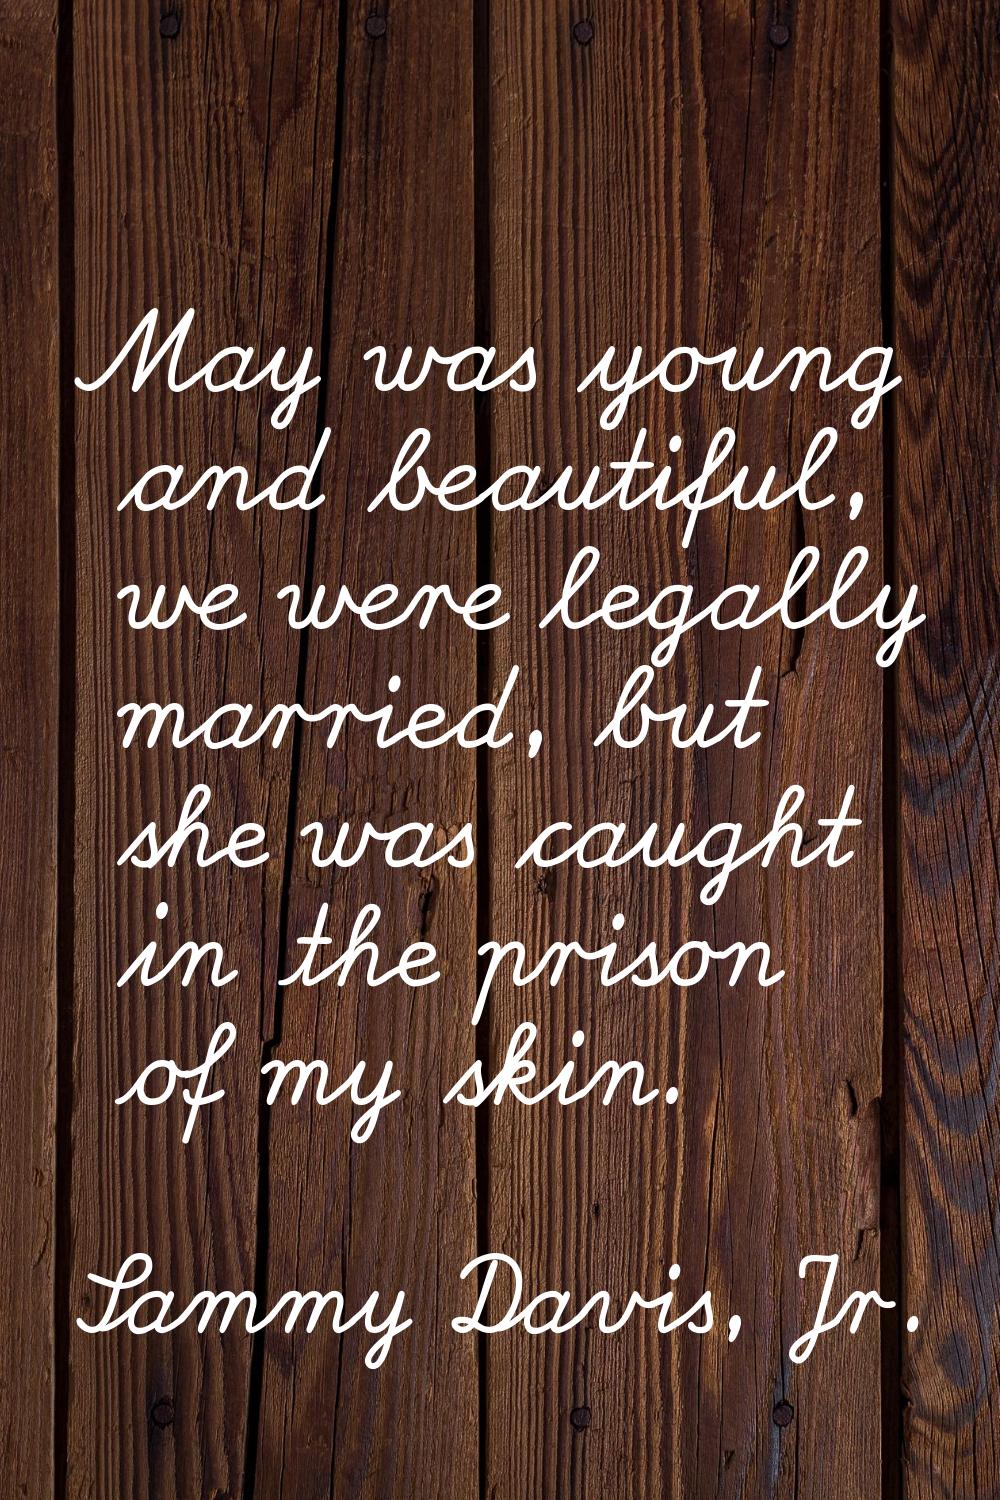 May was young and beautiful, we were legally married, but she was caught in the prison of my skin.